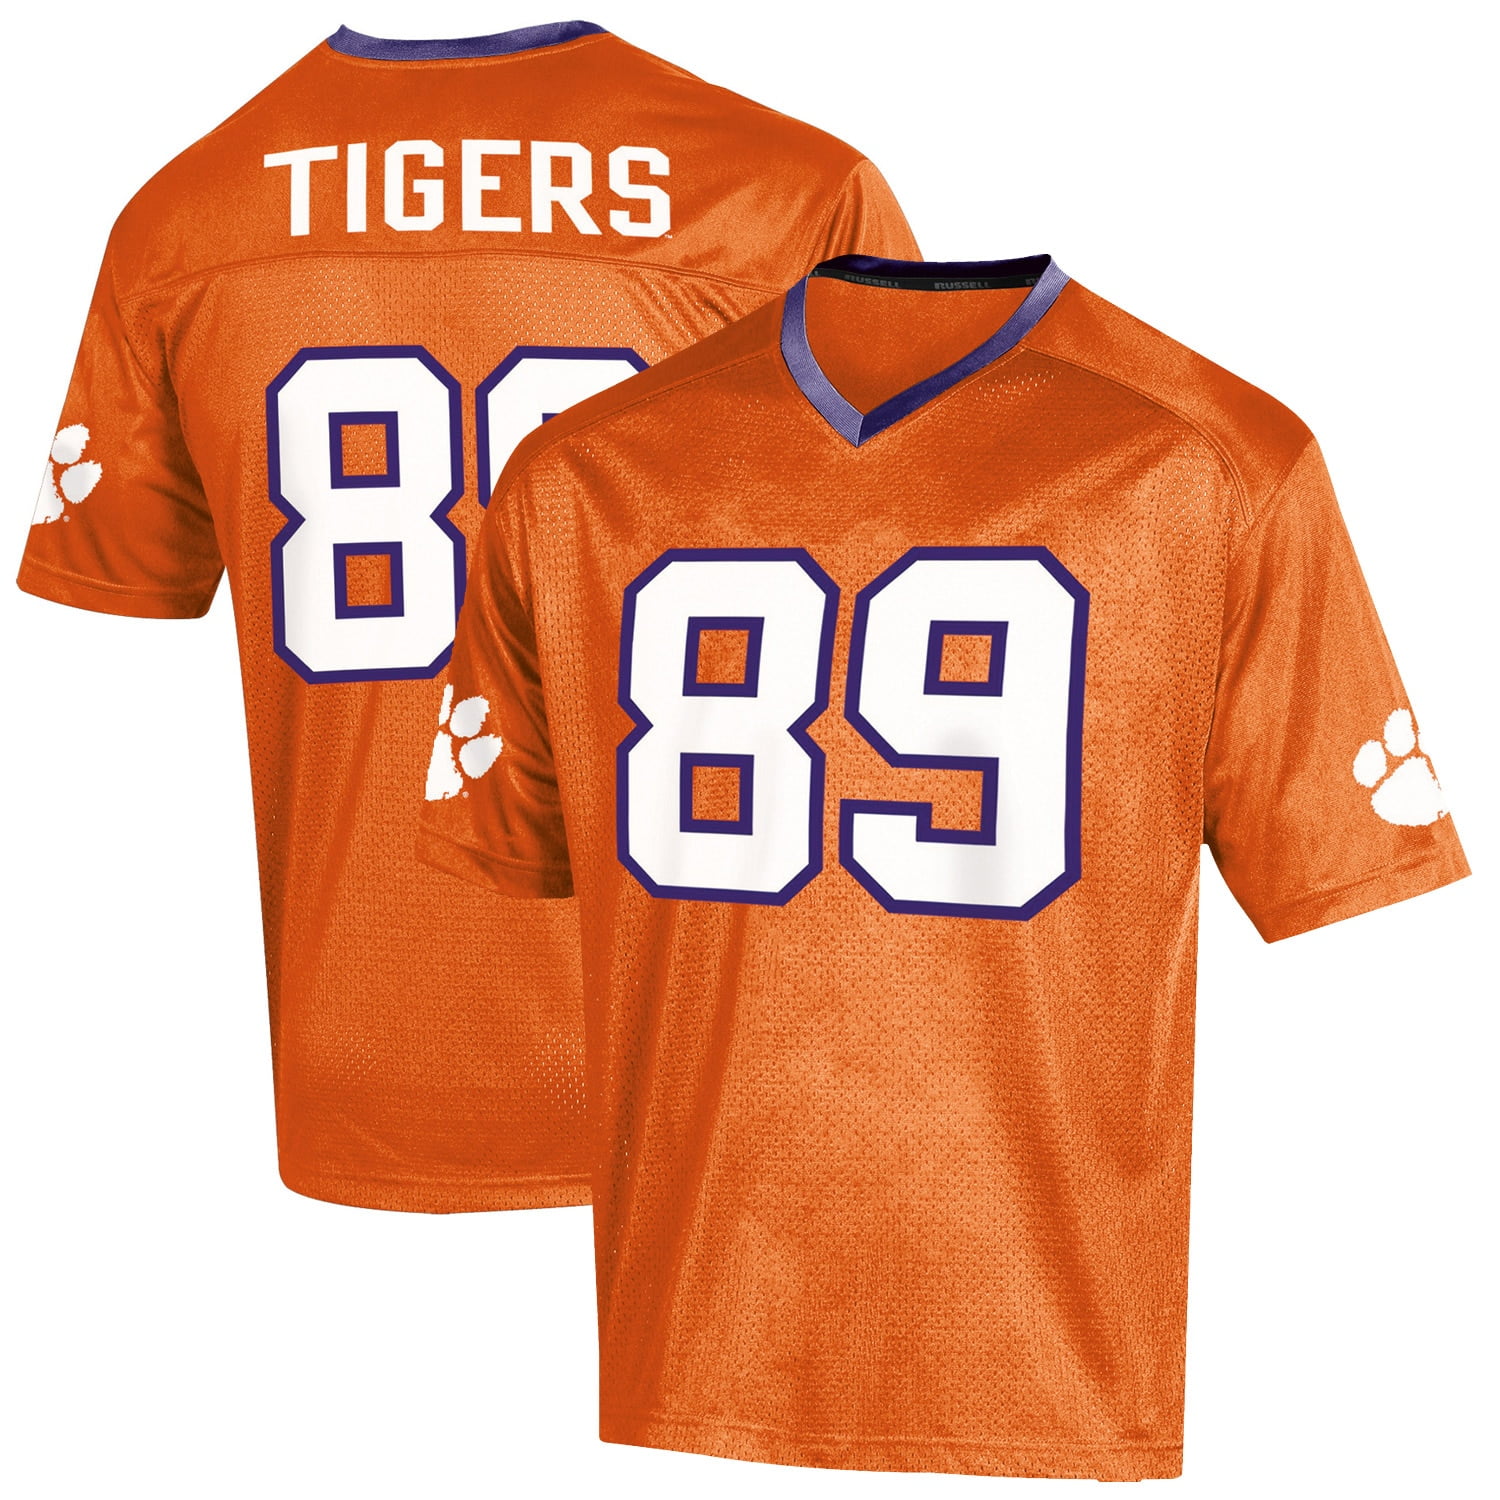 Russell Athletic - Youth Russell Athletic Orange Clemson Tigers Replica Football Jersey - Walmart.com